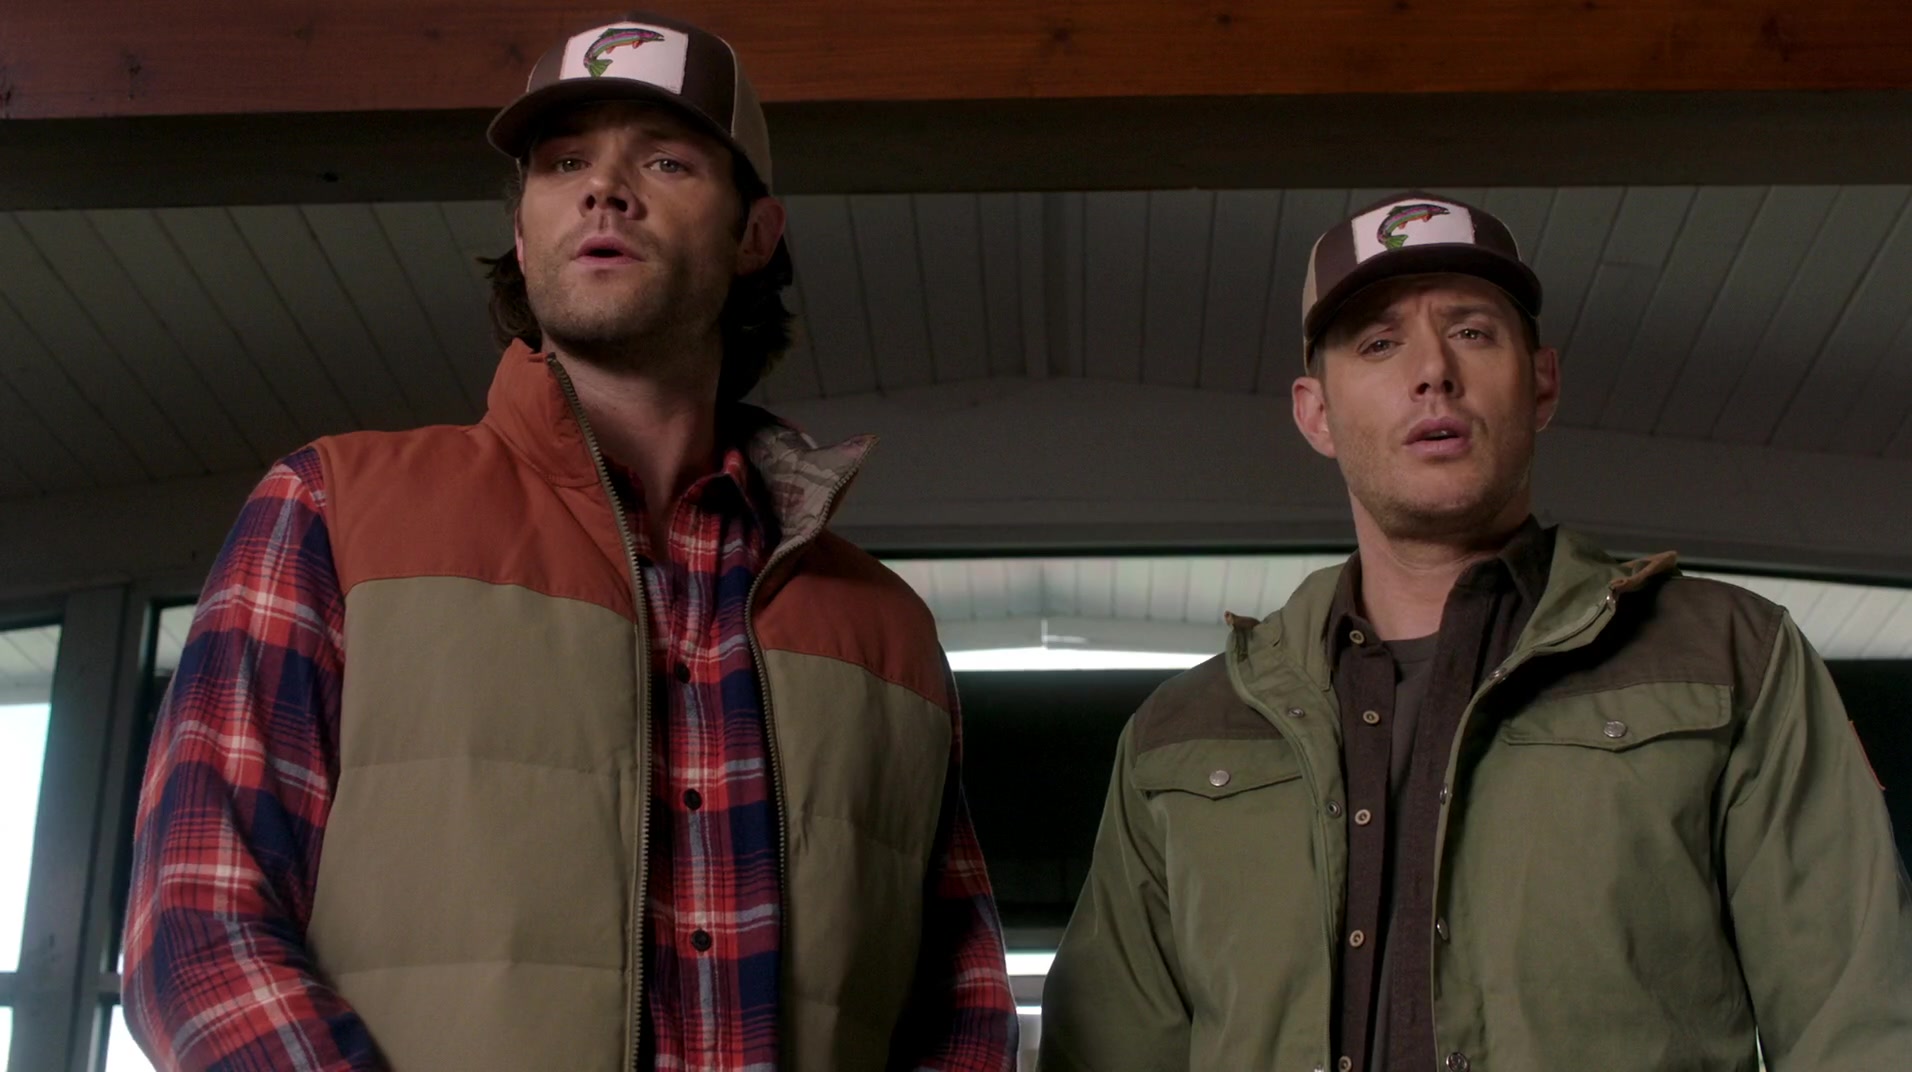 https://thewinchesterfamilybusiness.com/wp-content/CaptionThis/SPN_15x05.jpg